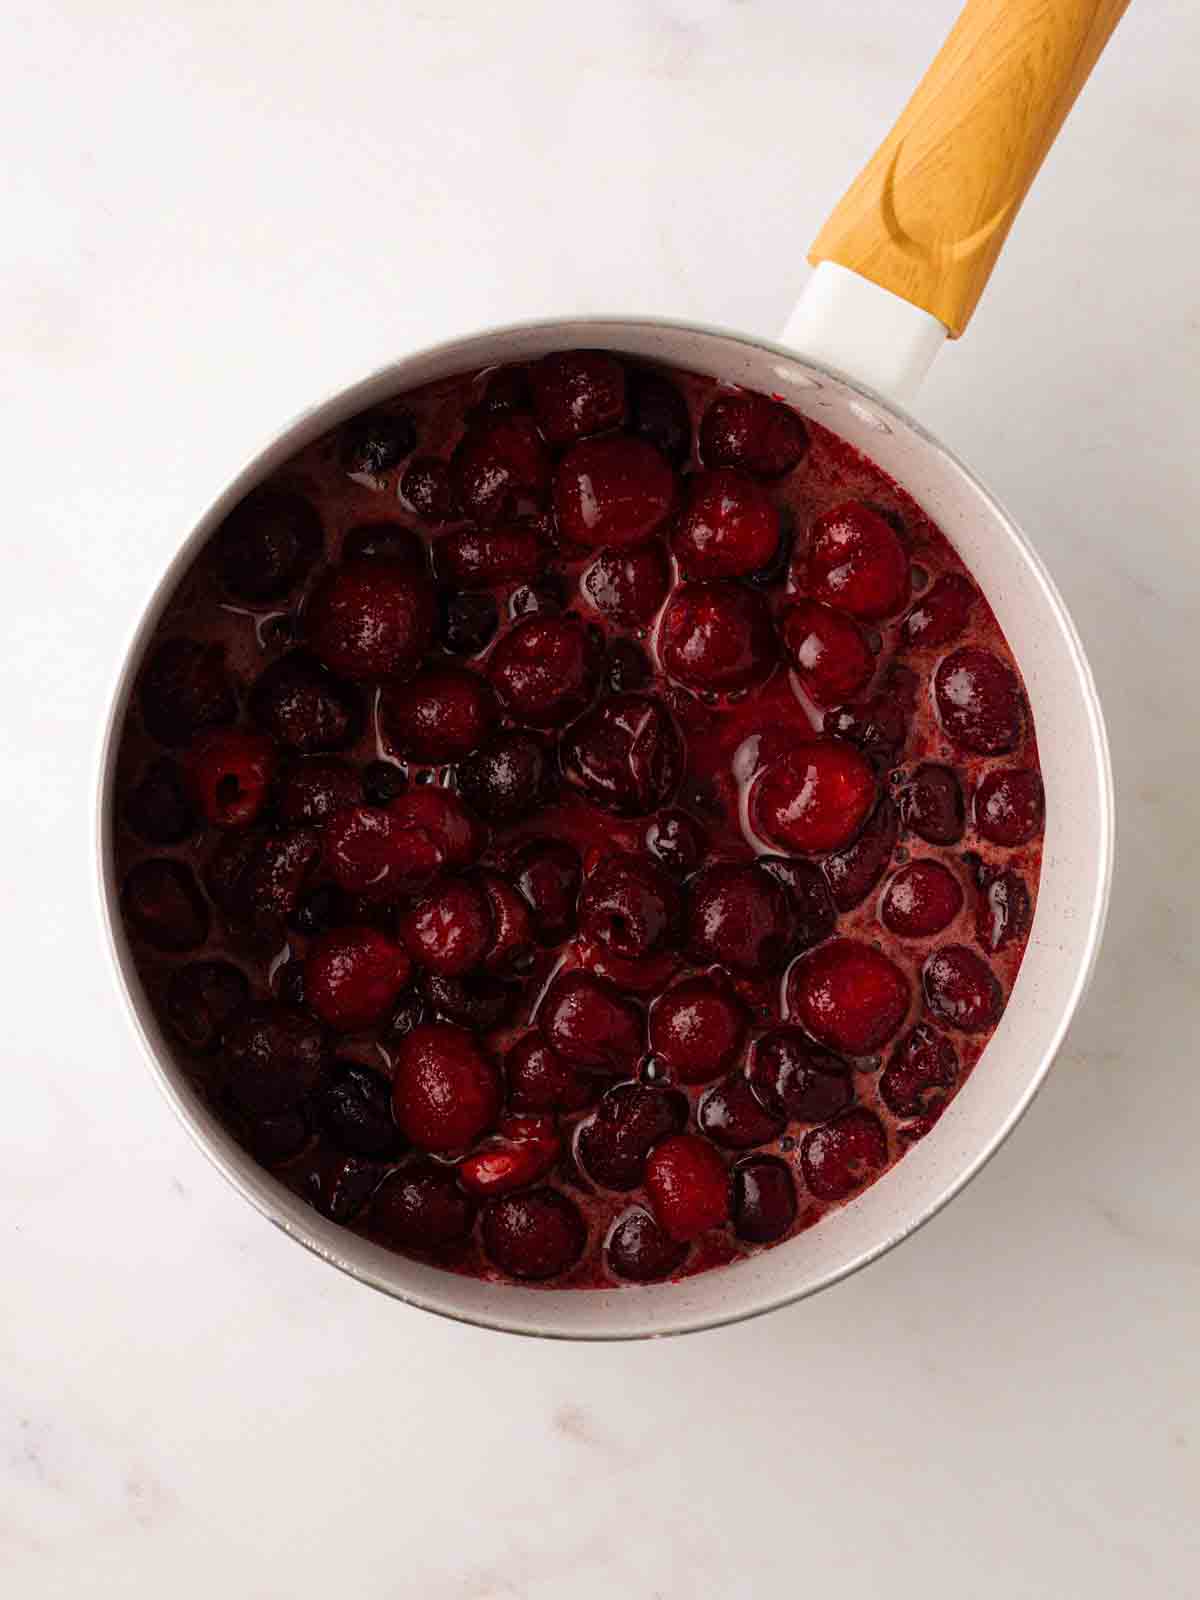 A pan filled with cherries in a juice for step 1 in the recipe for Cherry Pie.